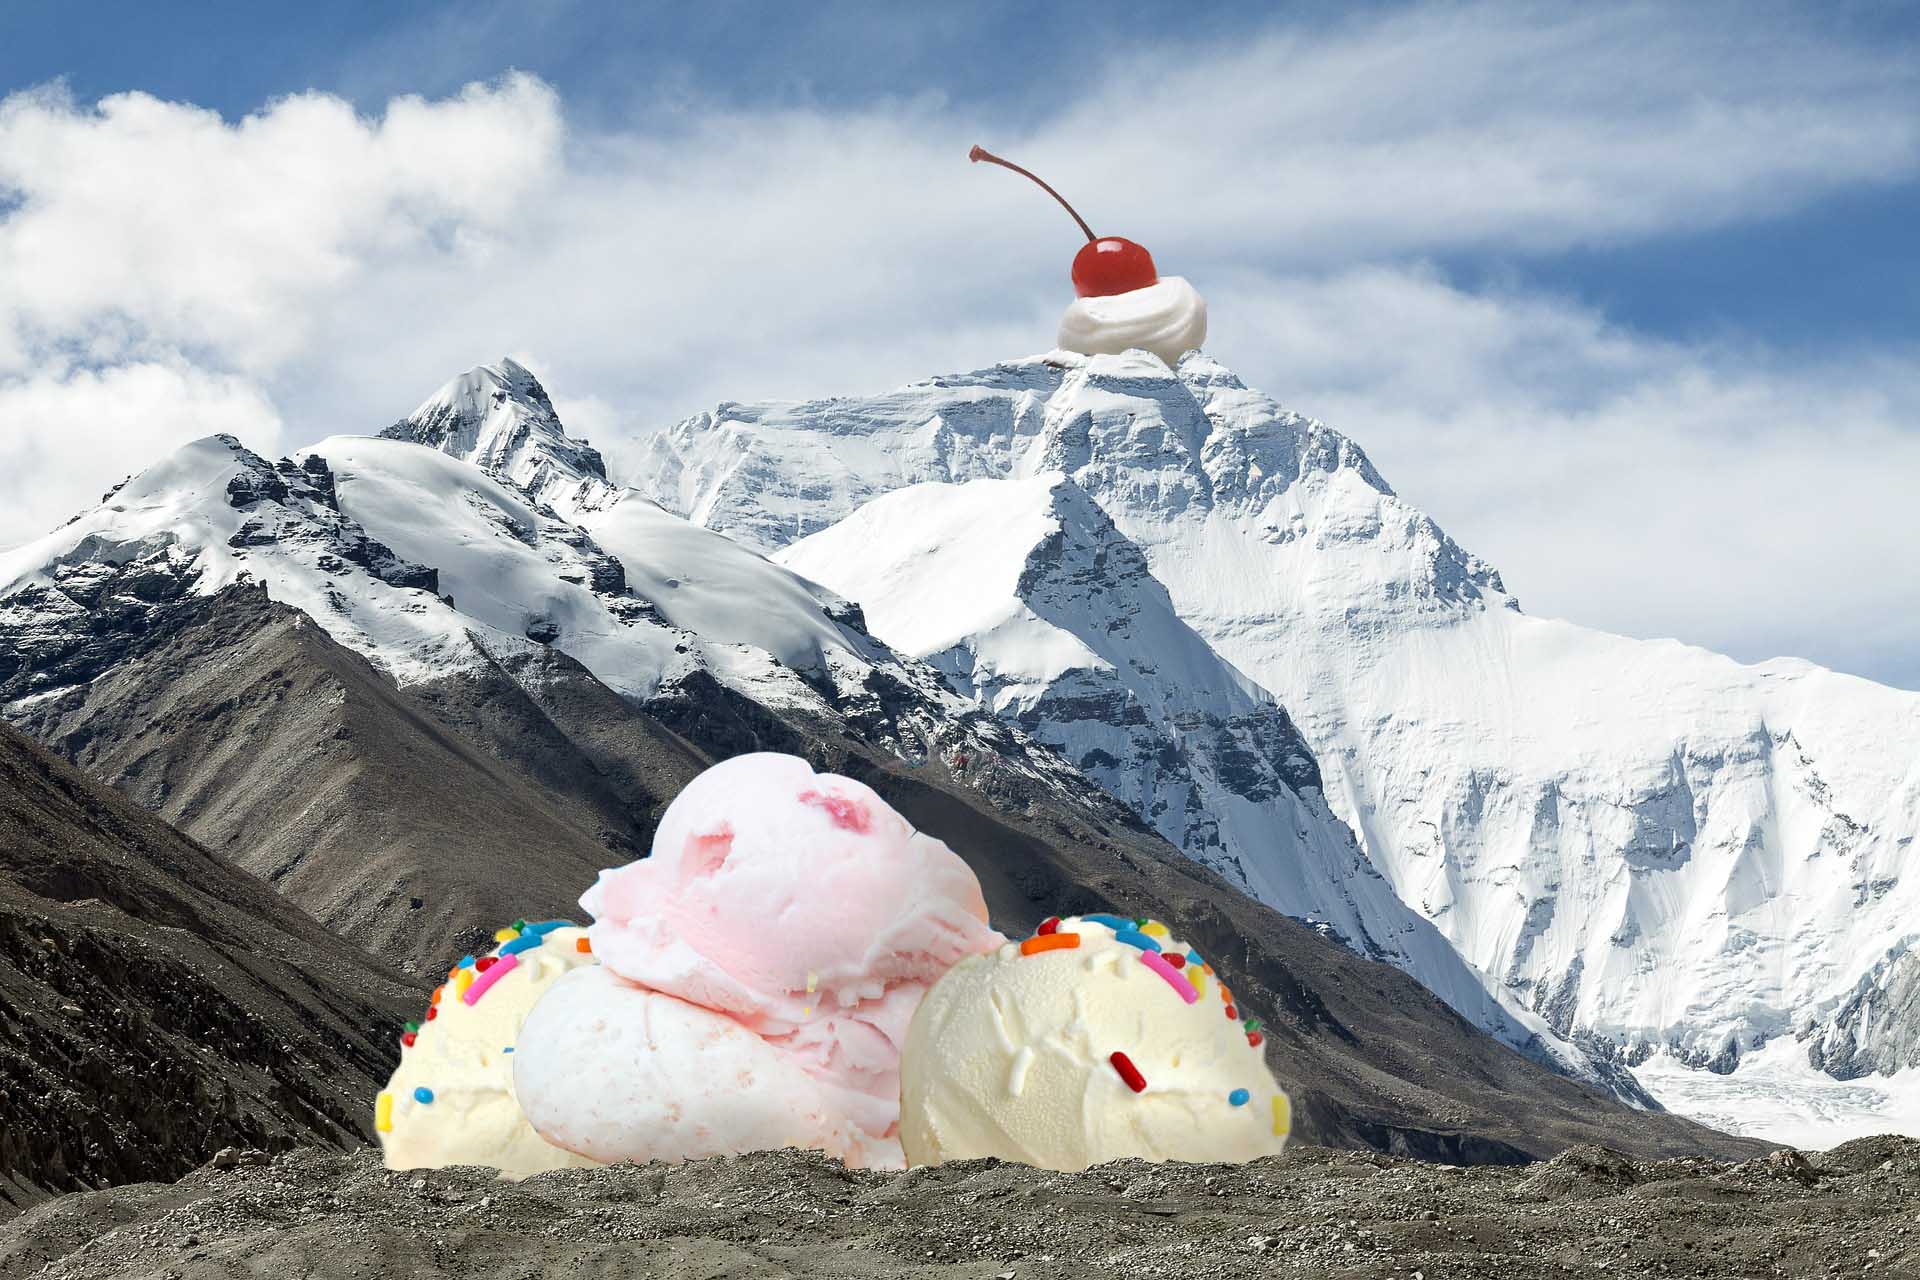 art every day number 543 digital collage cold mountain ice cream imaginary